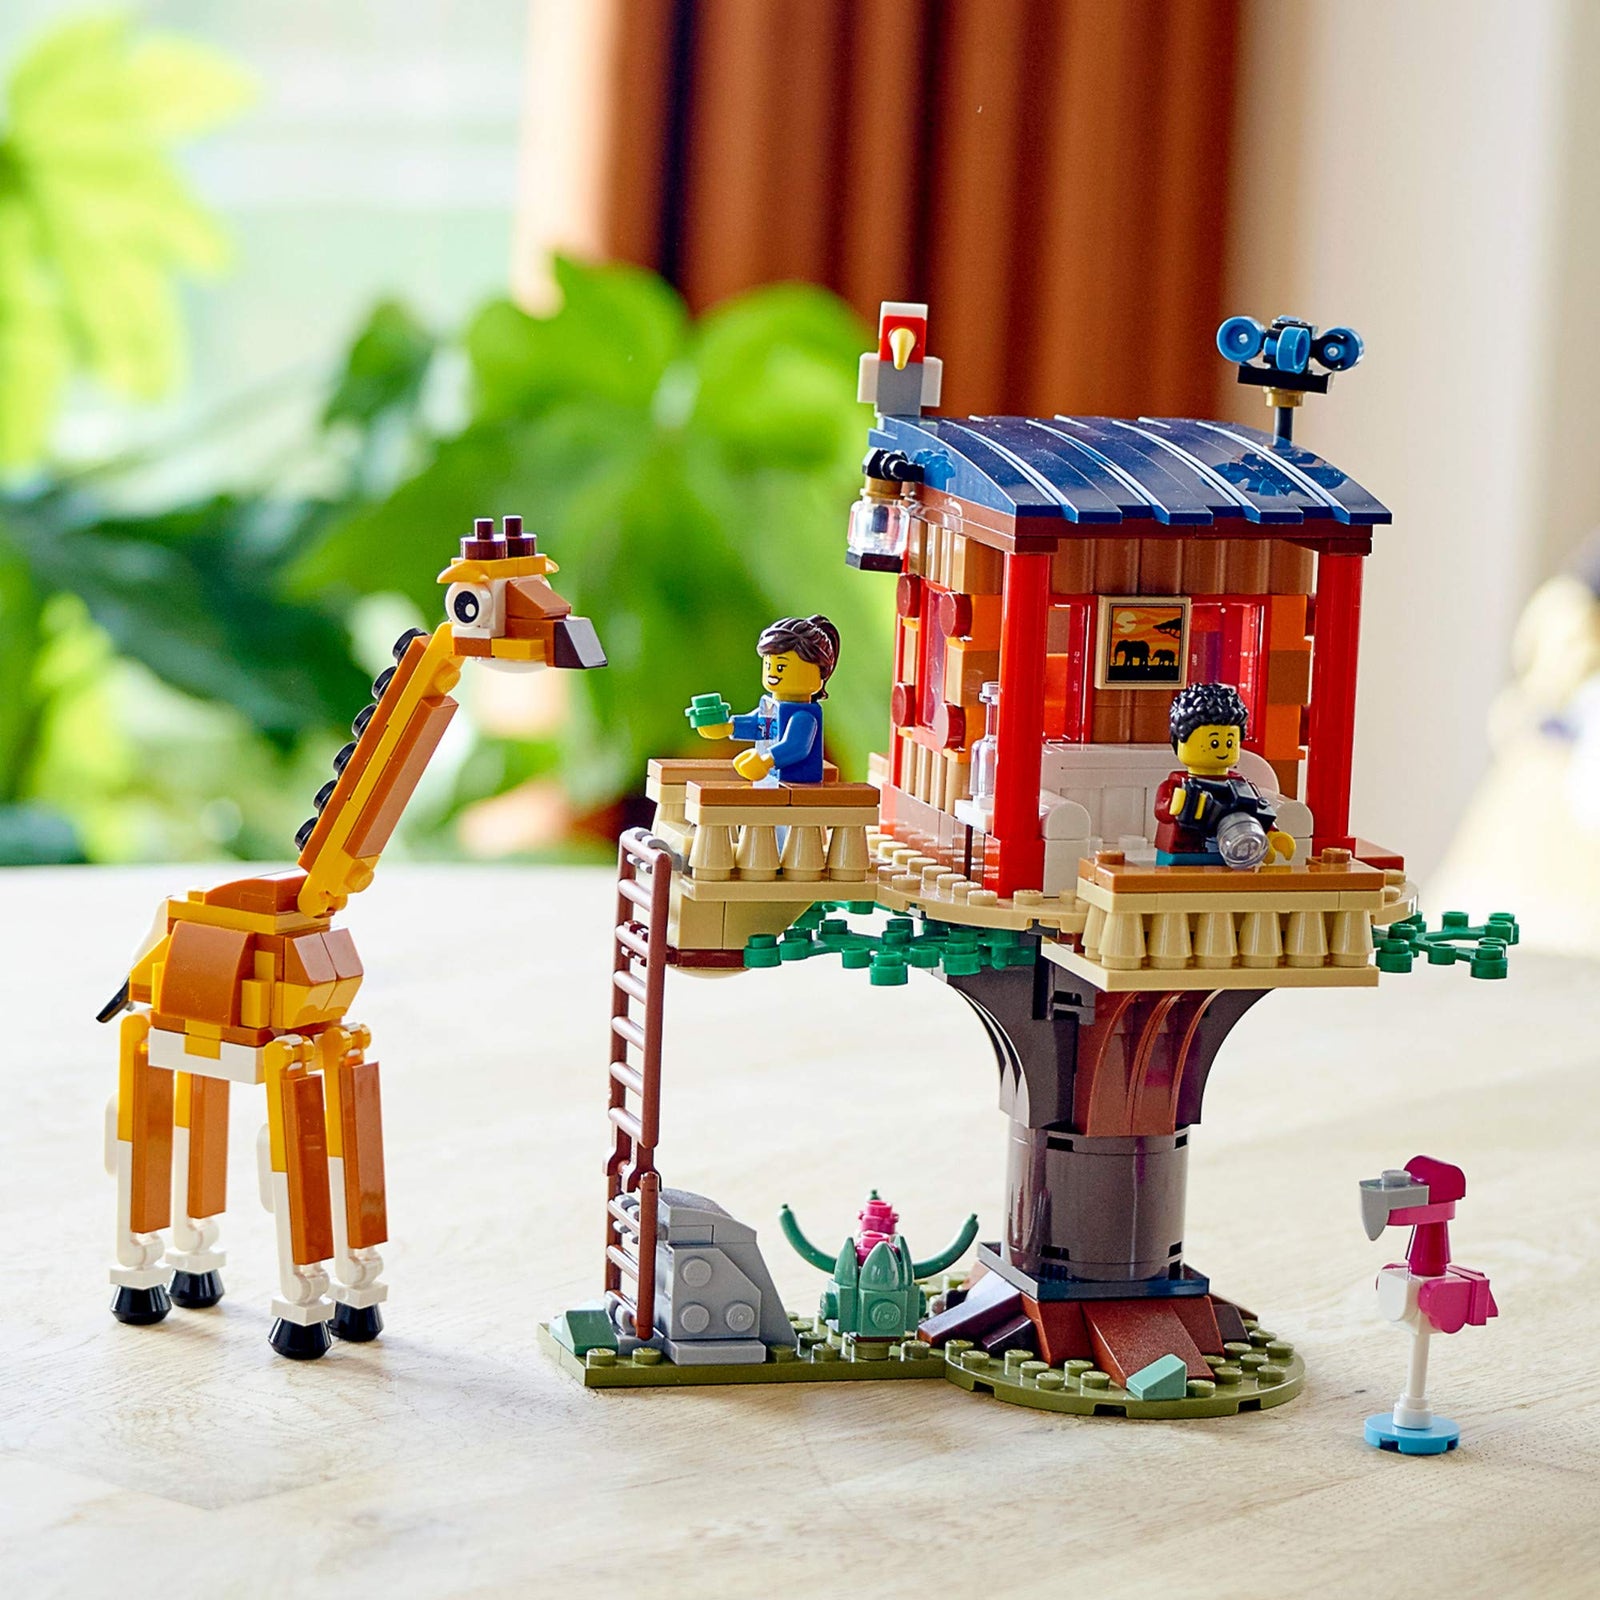 LEGO Creator 3in1 Safari Wildlife Tree House 31116 Building Kit Featuring a House Toy, Biplane Toy and Catamaran Toy; Best Building Sets for Kids Who Love Imaginative Play, New 2021 (397 Pieces)